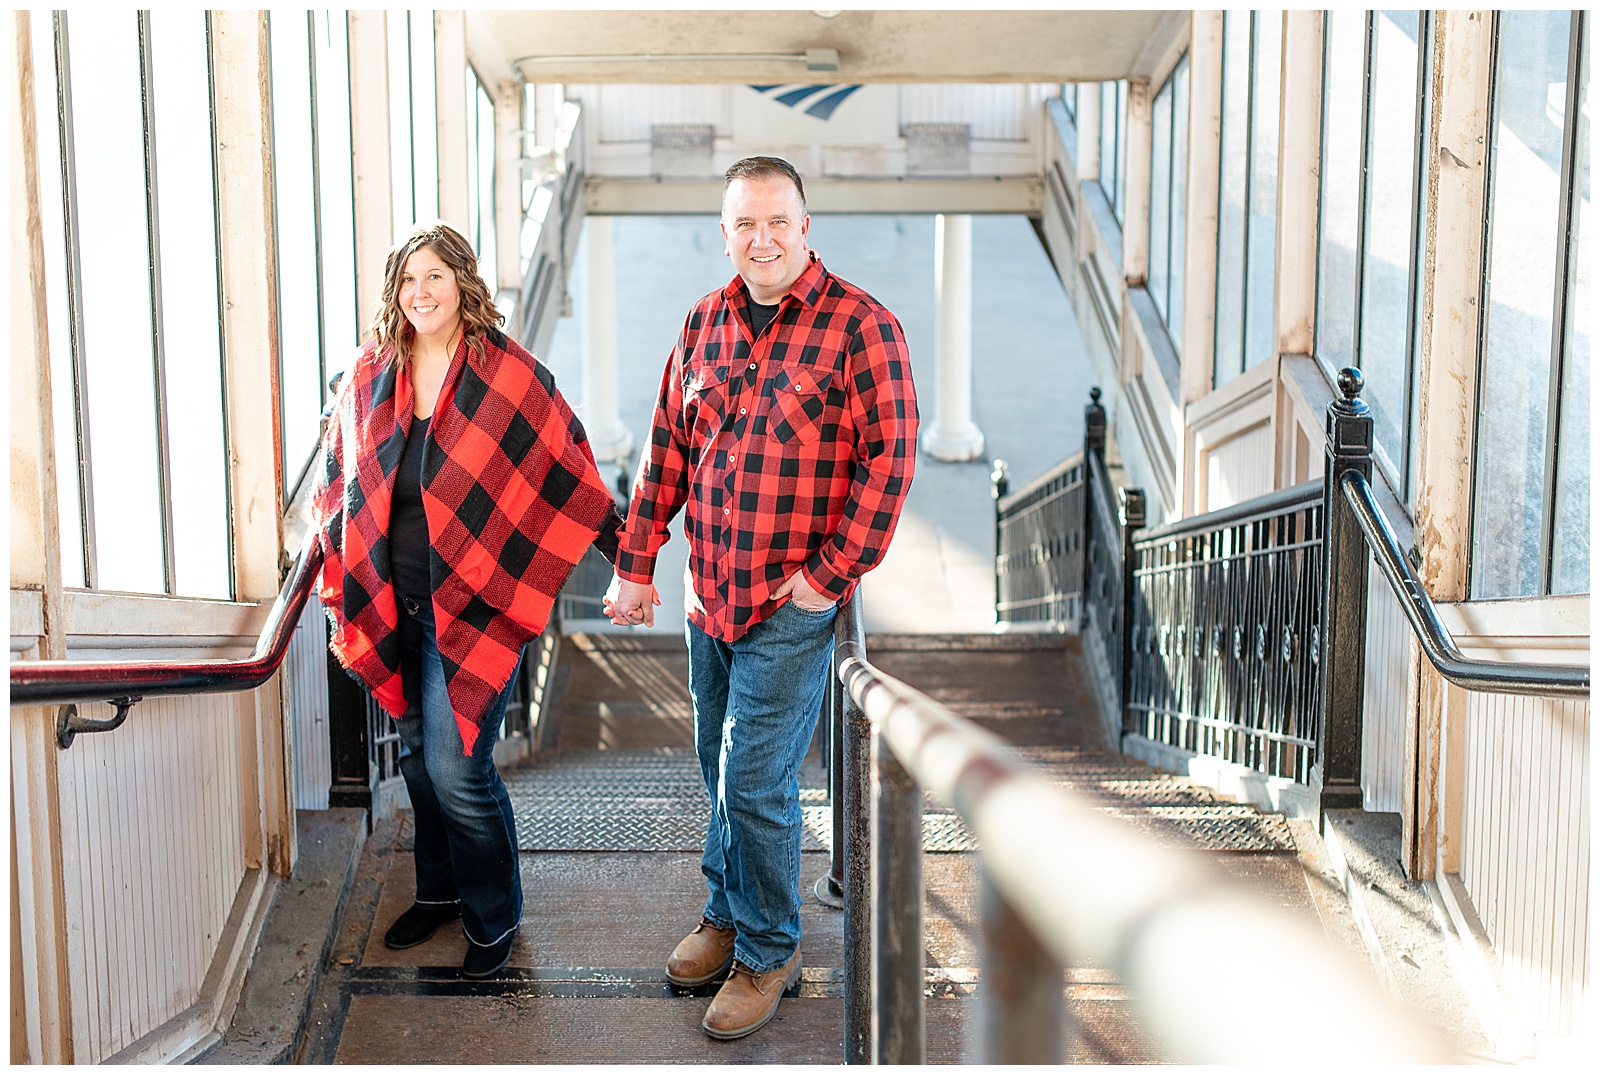 couple standing in stairwell going down to train tracks smiling at camera